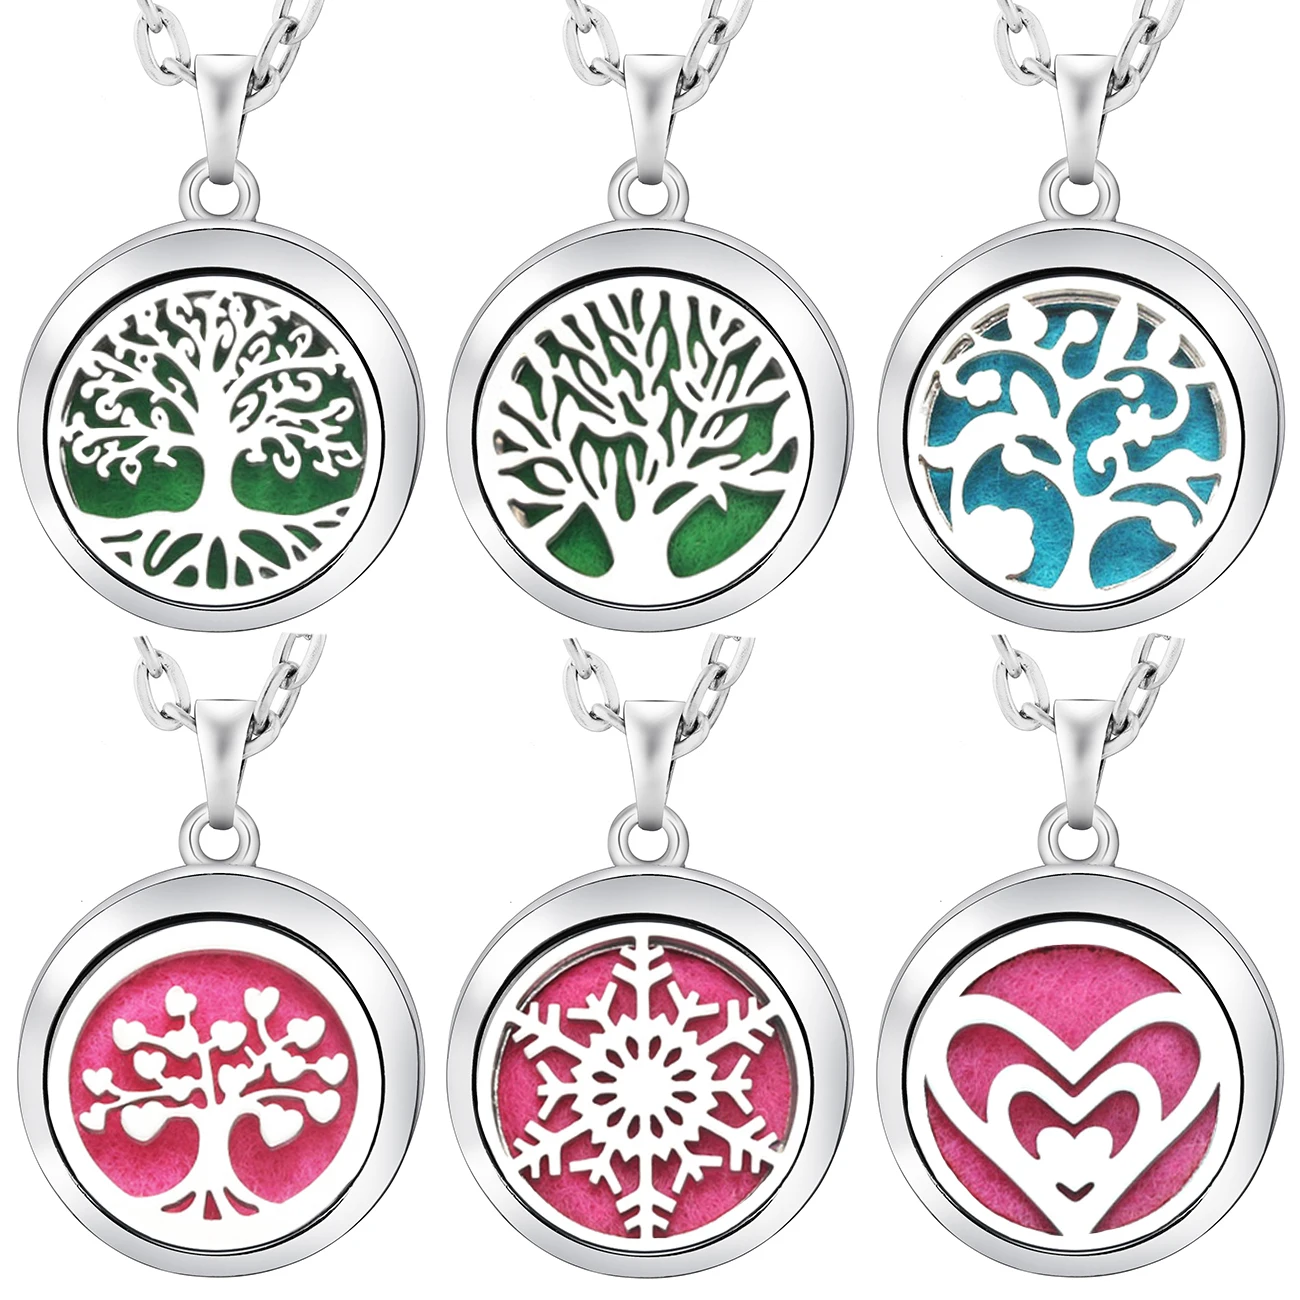 New Stainless Steel Fashion Tree Of Life  Aromatherapy Necklace Essential Oil Diffuser Perfume Locket Pendant Women Jewelry Gift